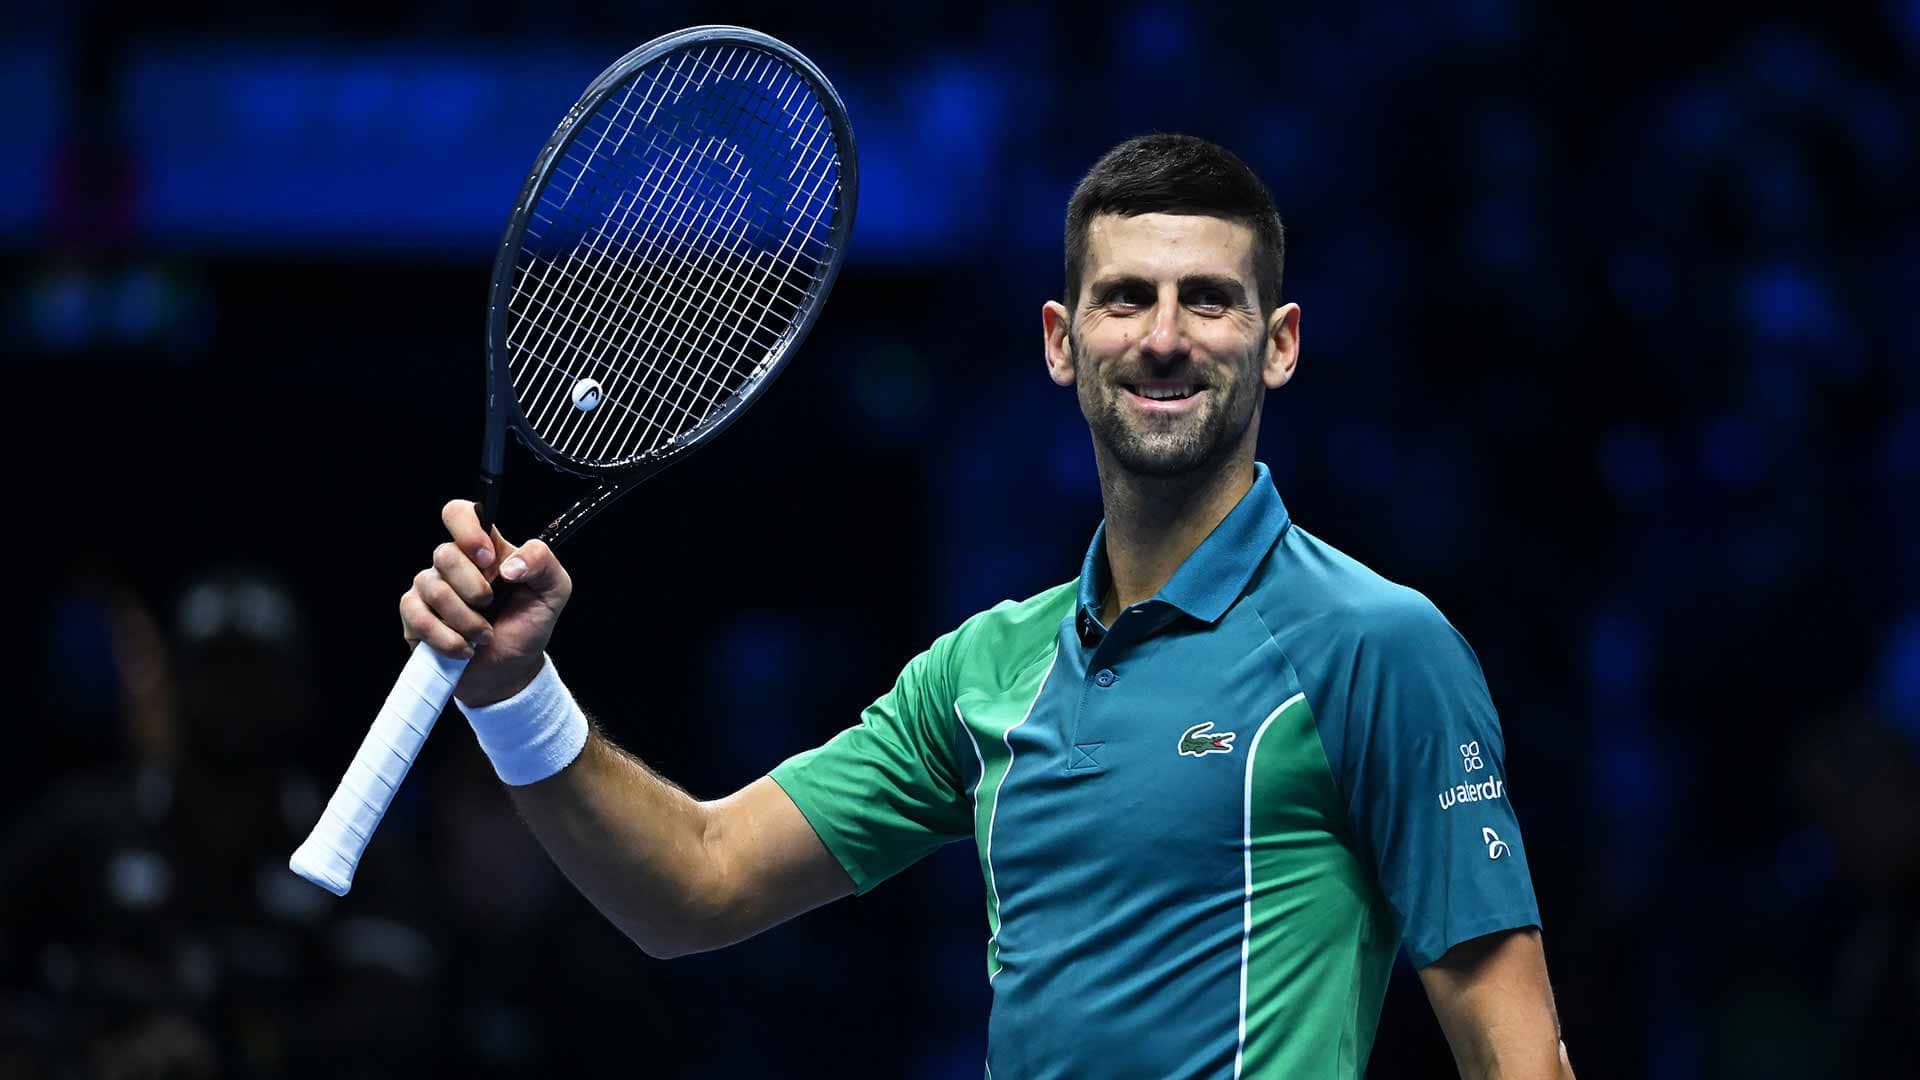 Novak Djokovic clinches year-end World No. 1 for record 8th time